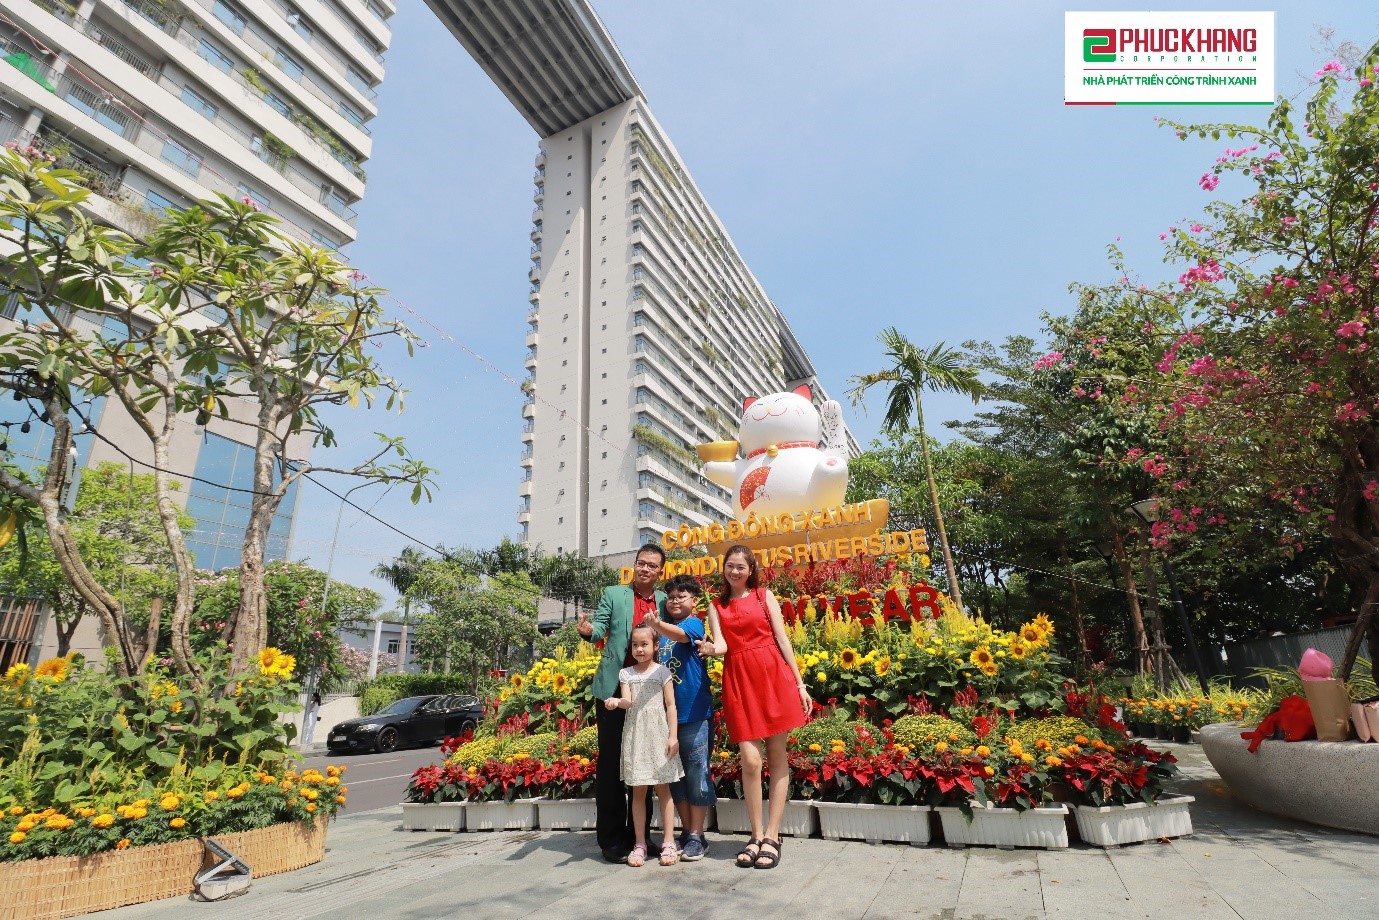 Diamond Lotus Riverside creates a green, friendly living space, preserves culture, and spreads a green lifestyle.. in the residential community.